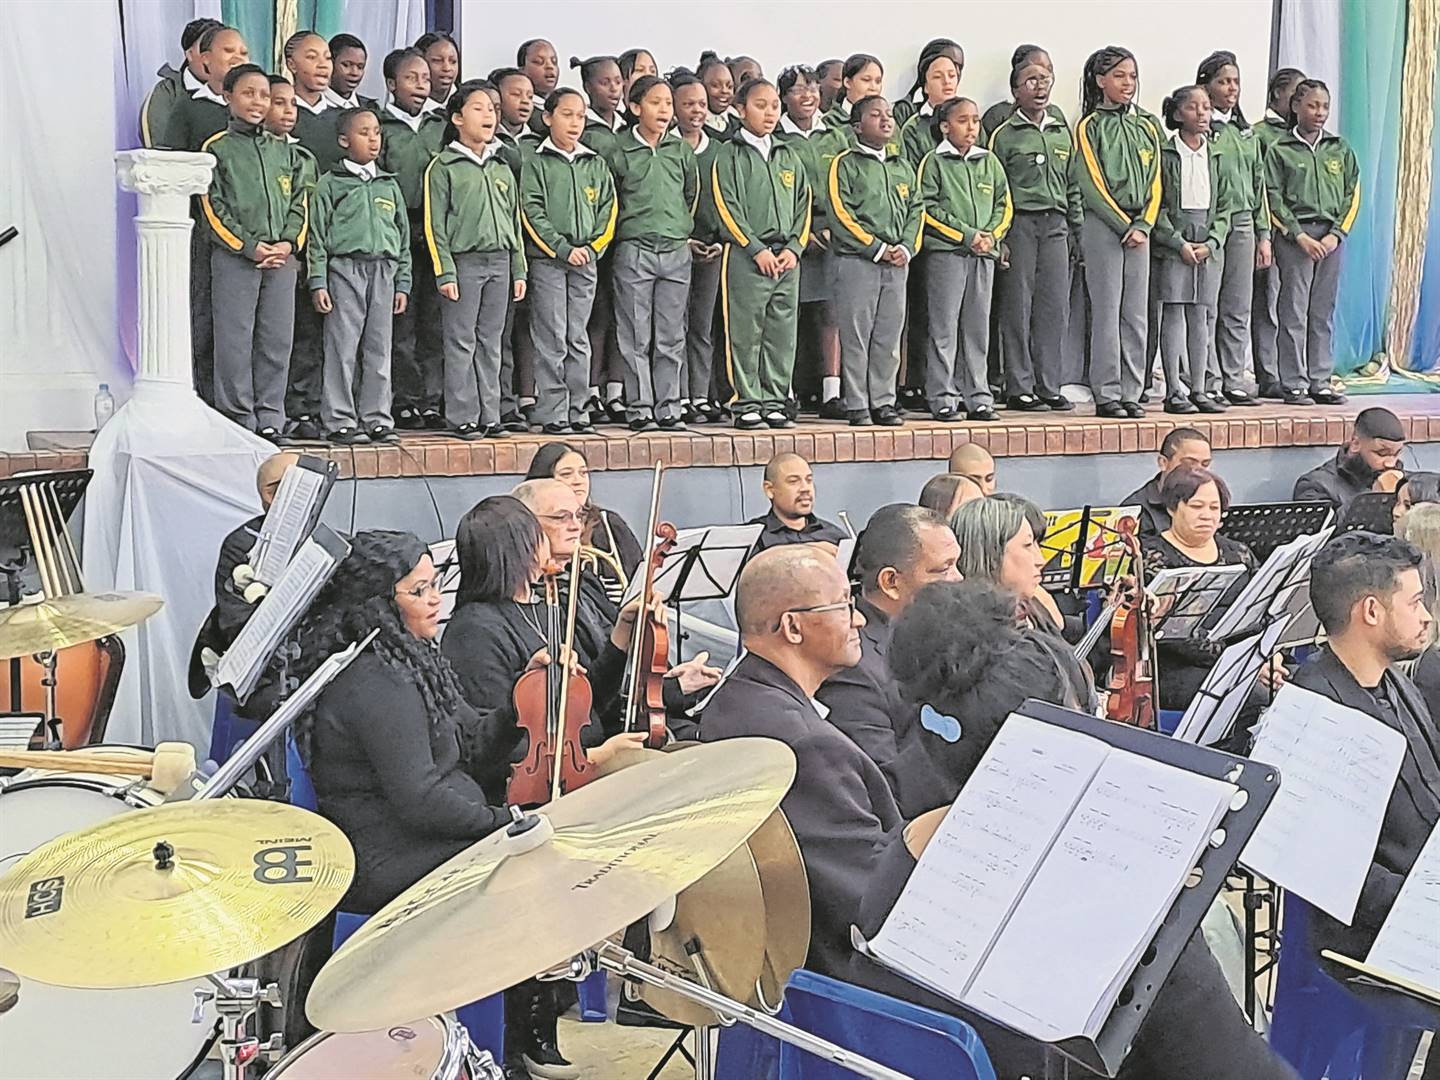 Constantia Primary School’s choir put up a proud performance during the official debut of their school song on Saturday 5 August. PHOTO: Supplied